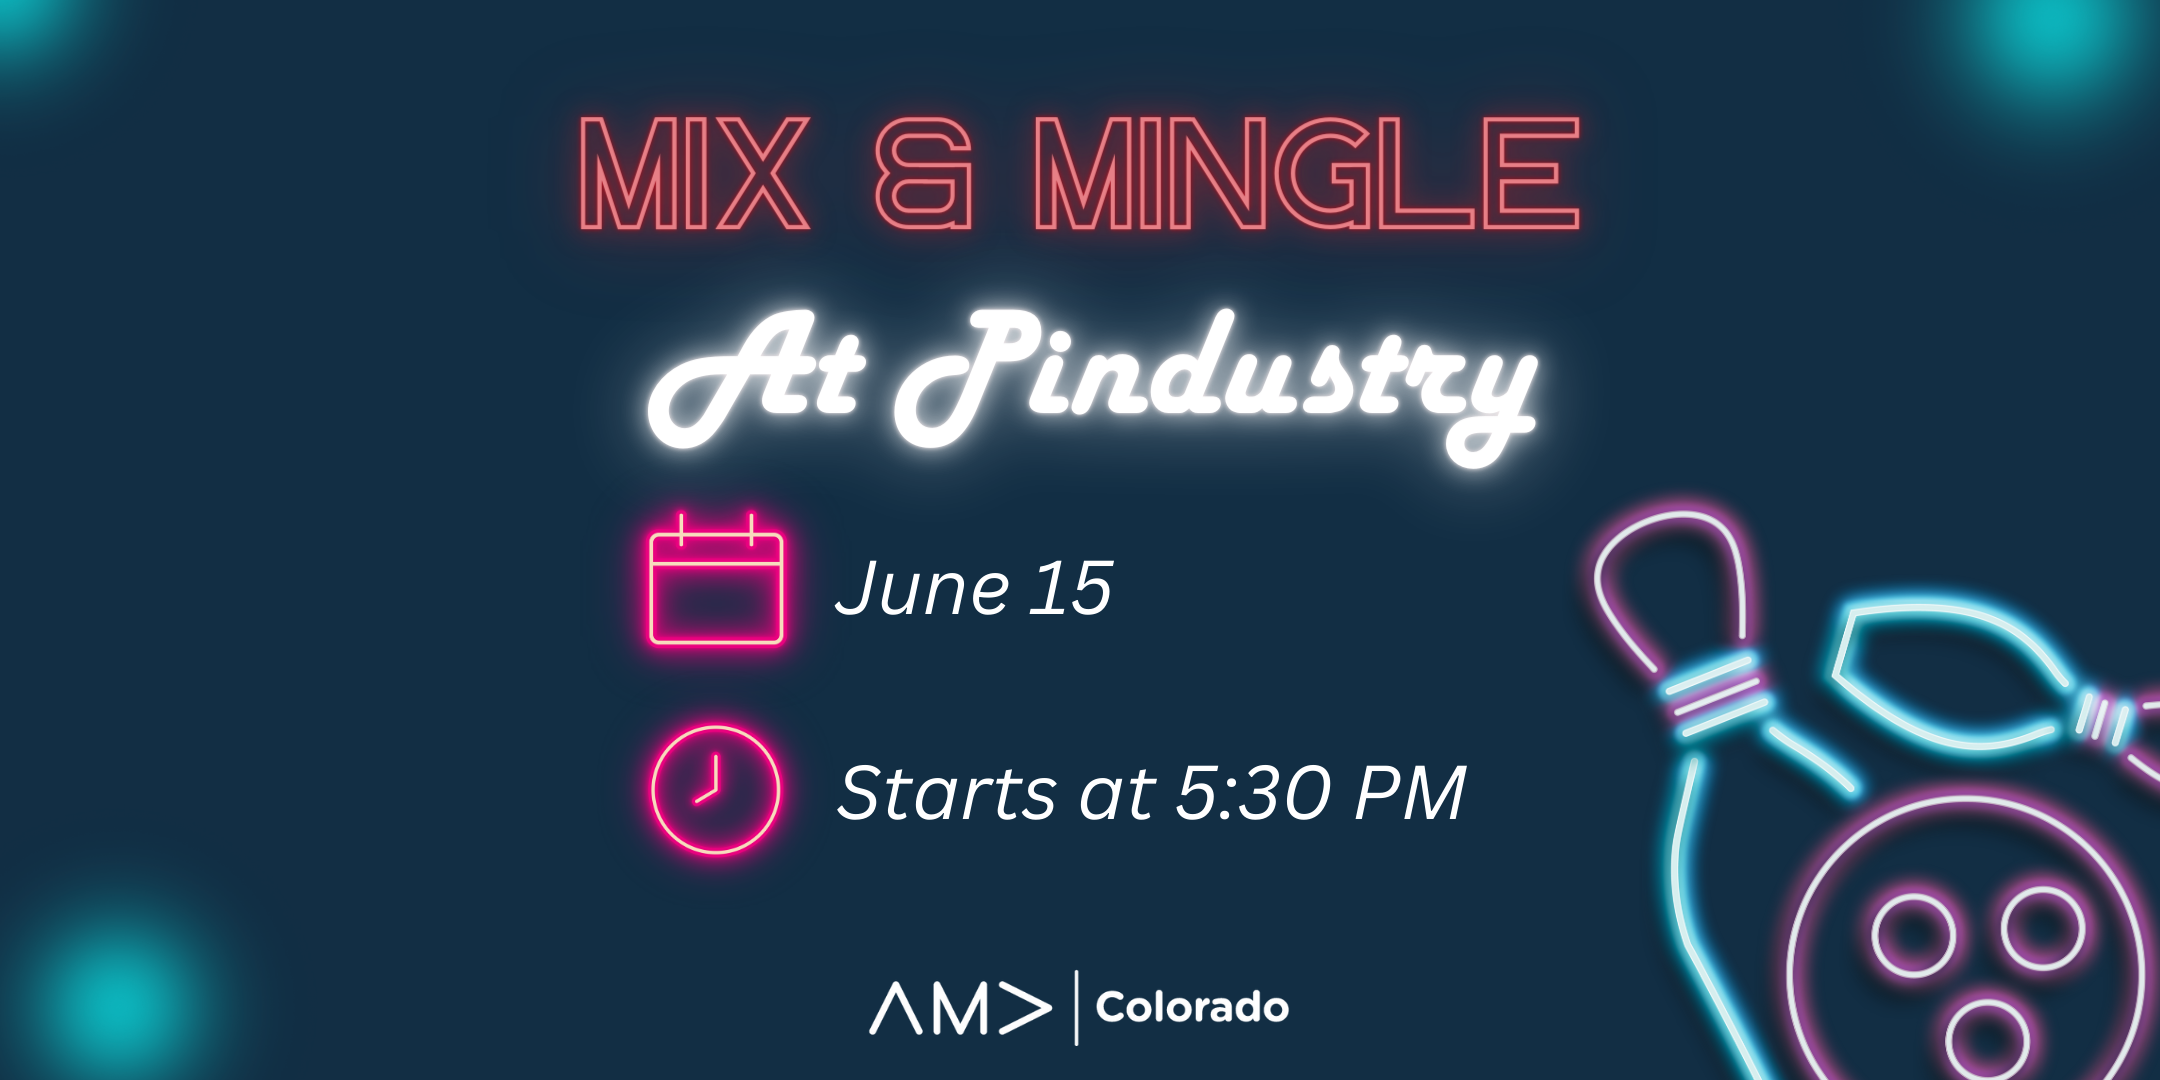 Mix and Mingle at Pindustry graphic image